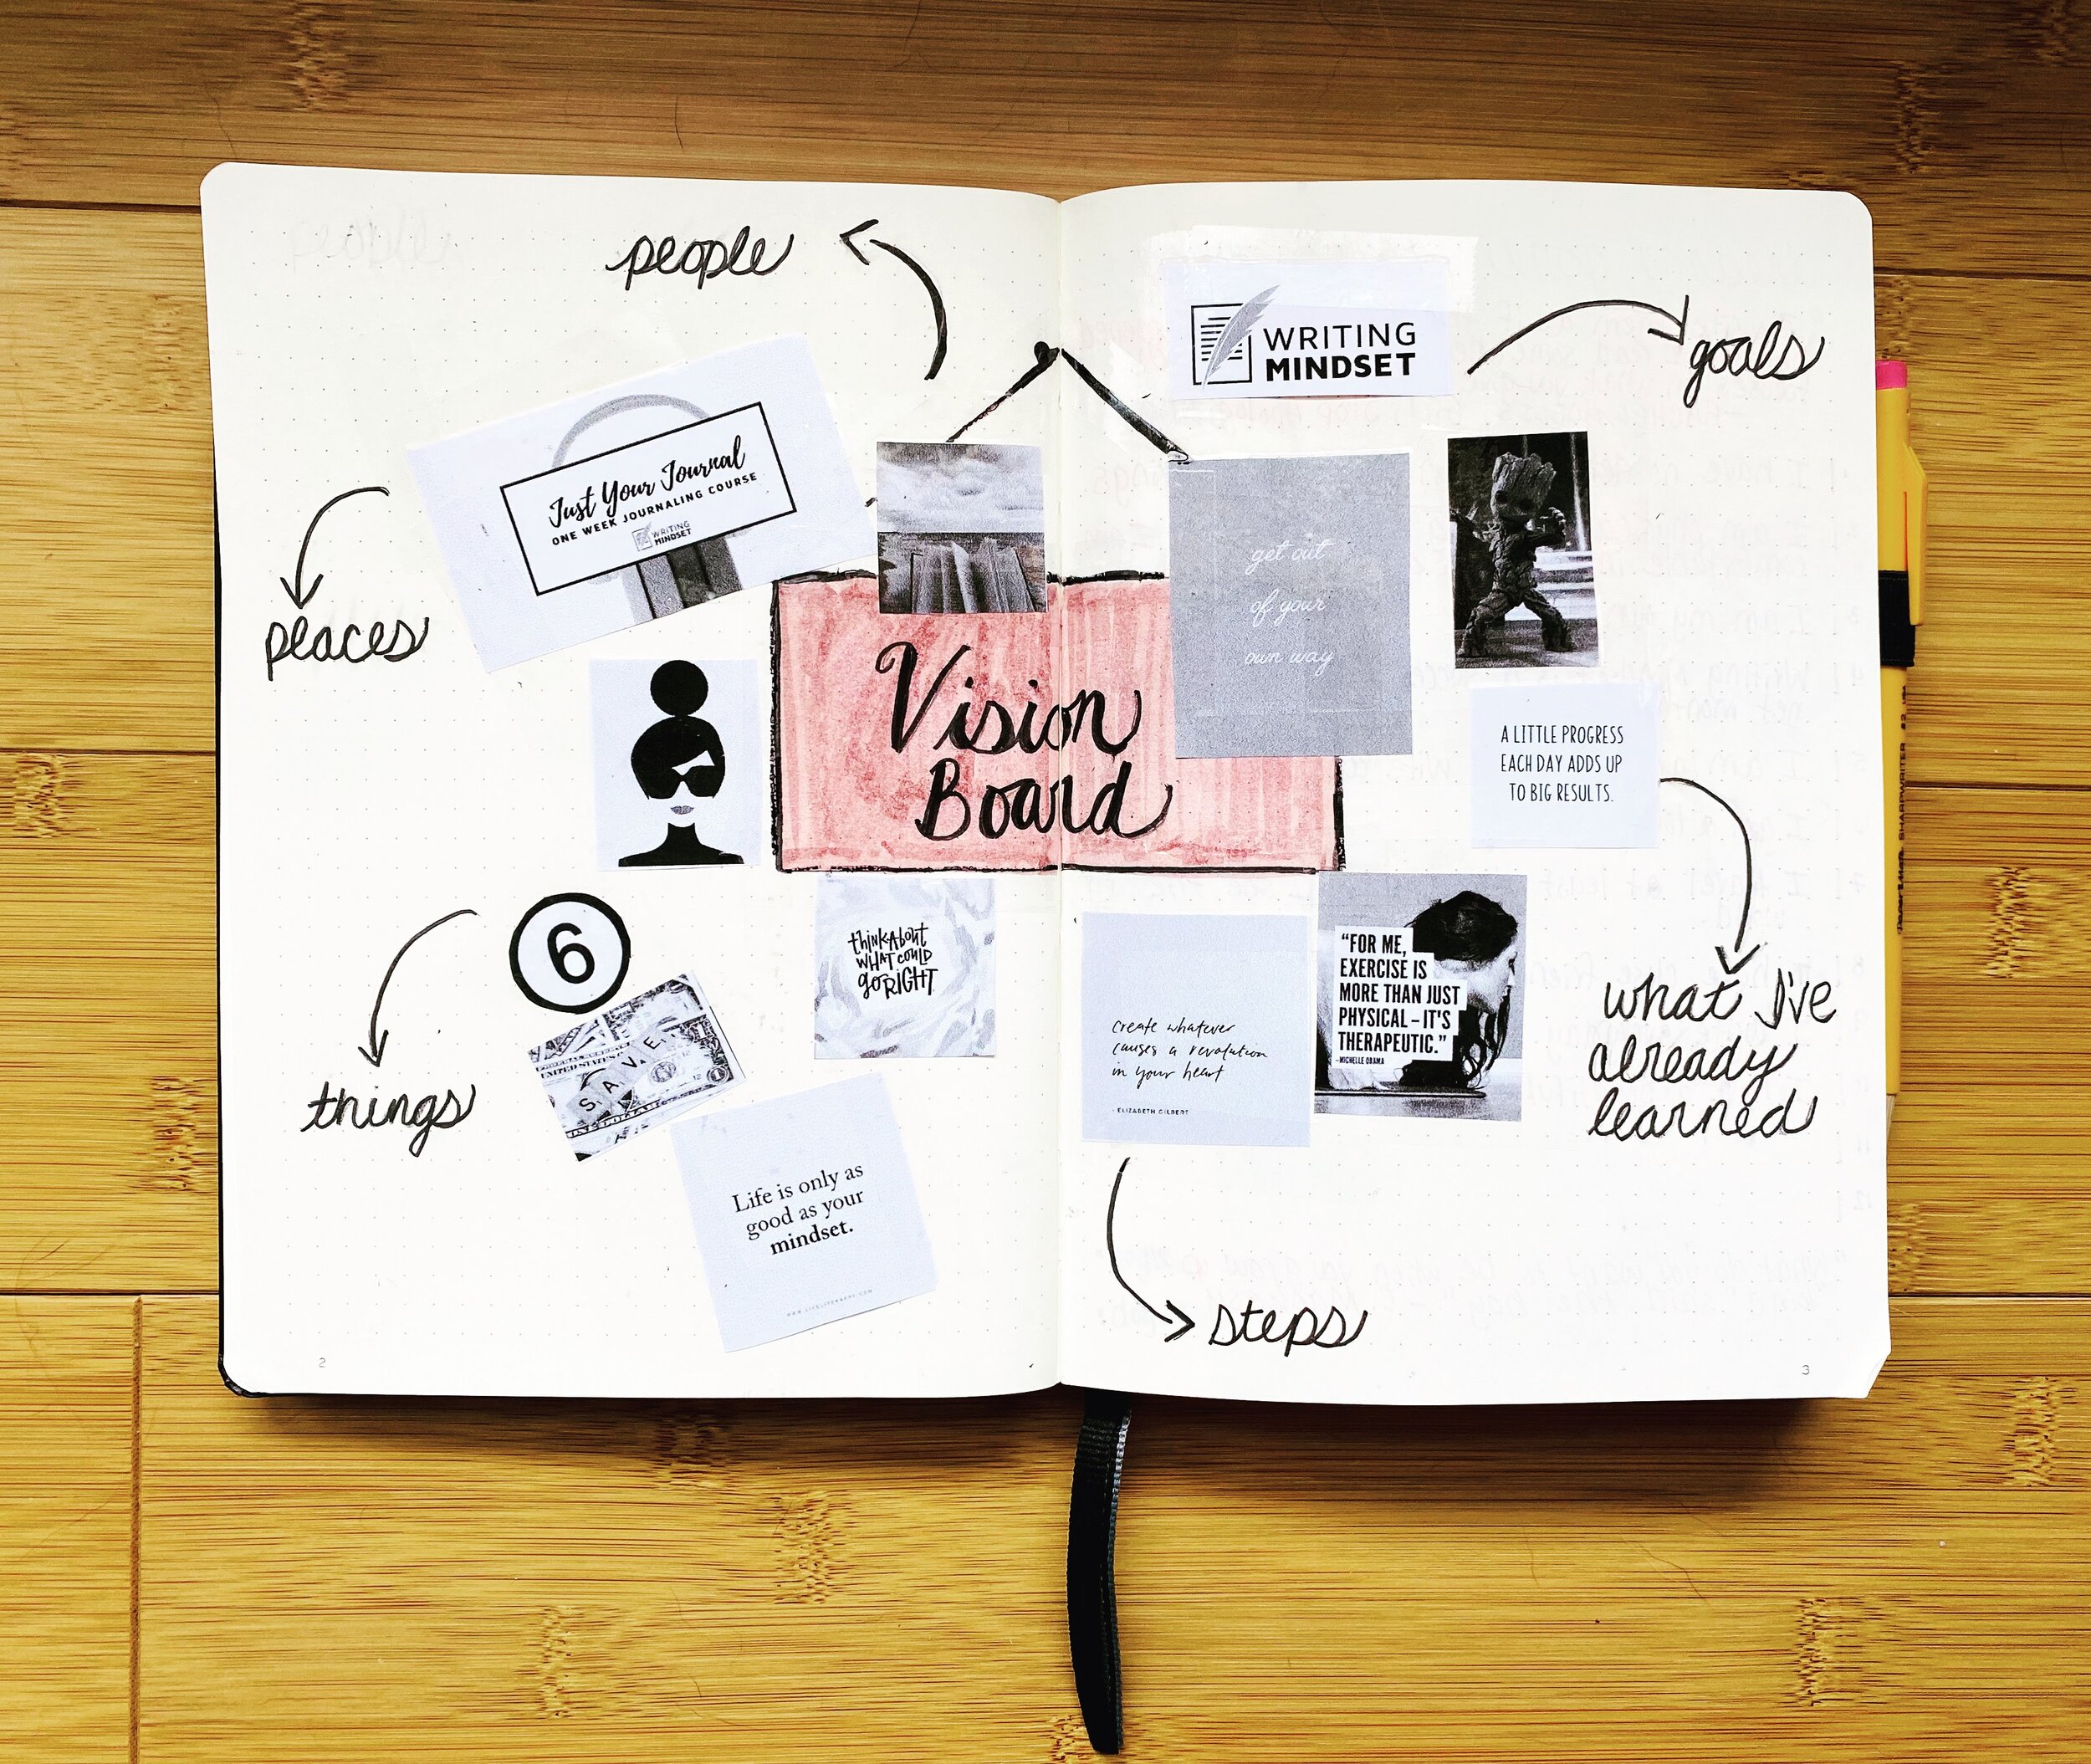 Vision Board Ideas that Work (And How To Make A Vision Board